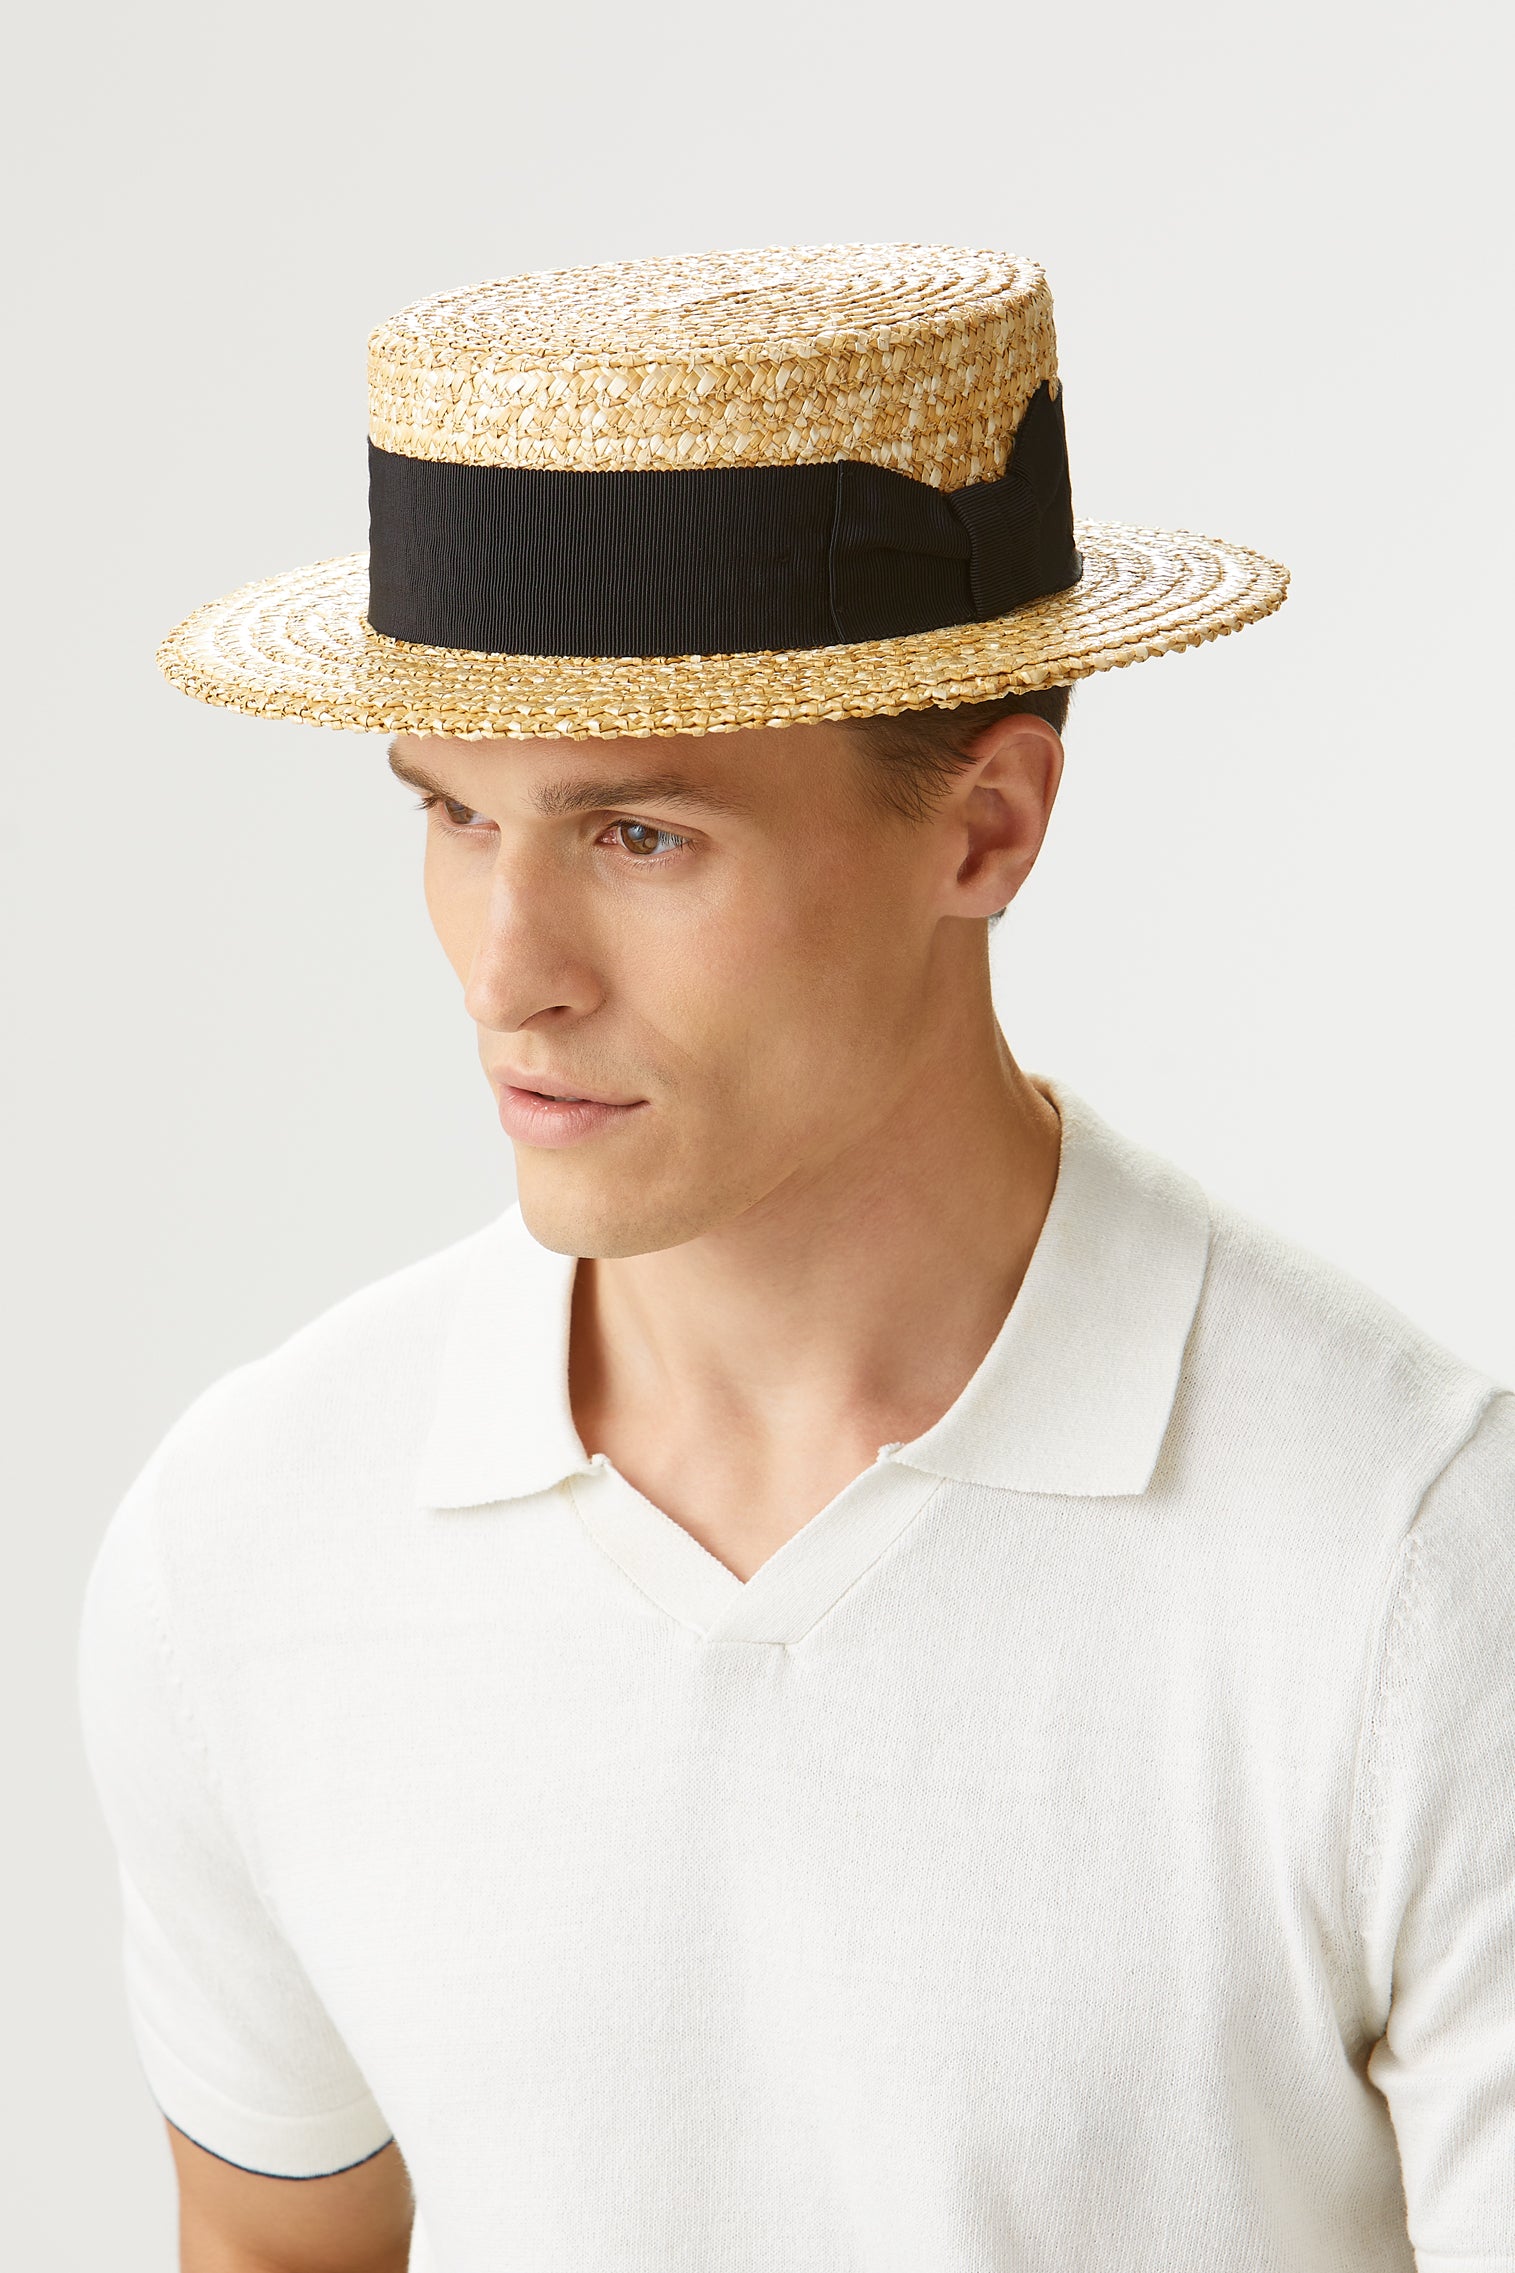 Classic Boater - Mens Featured - Lock & Co. Hatters London UK